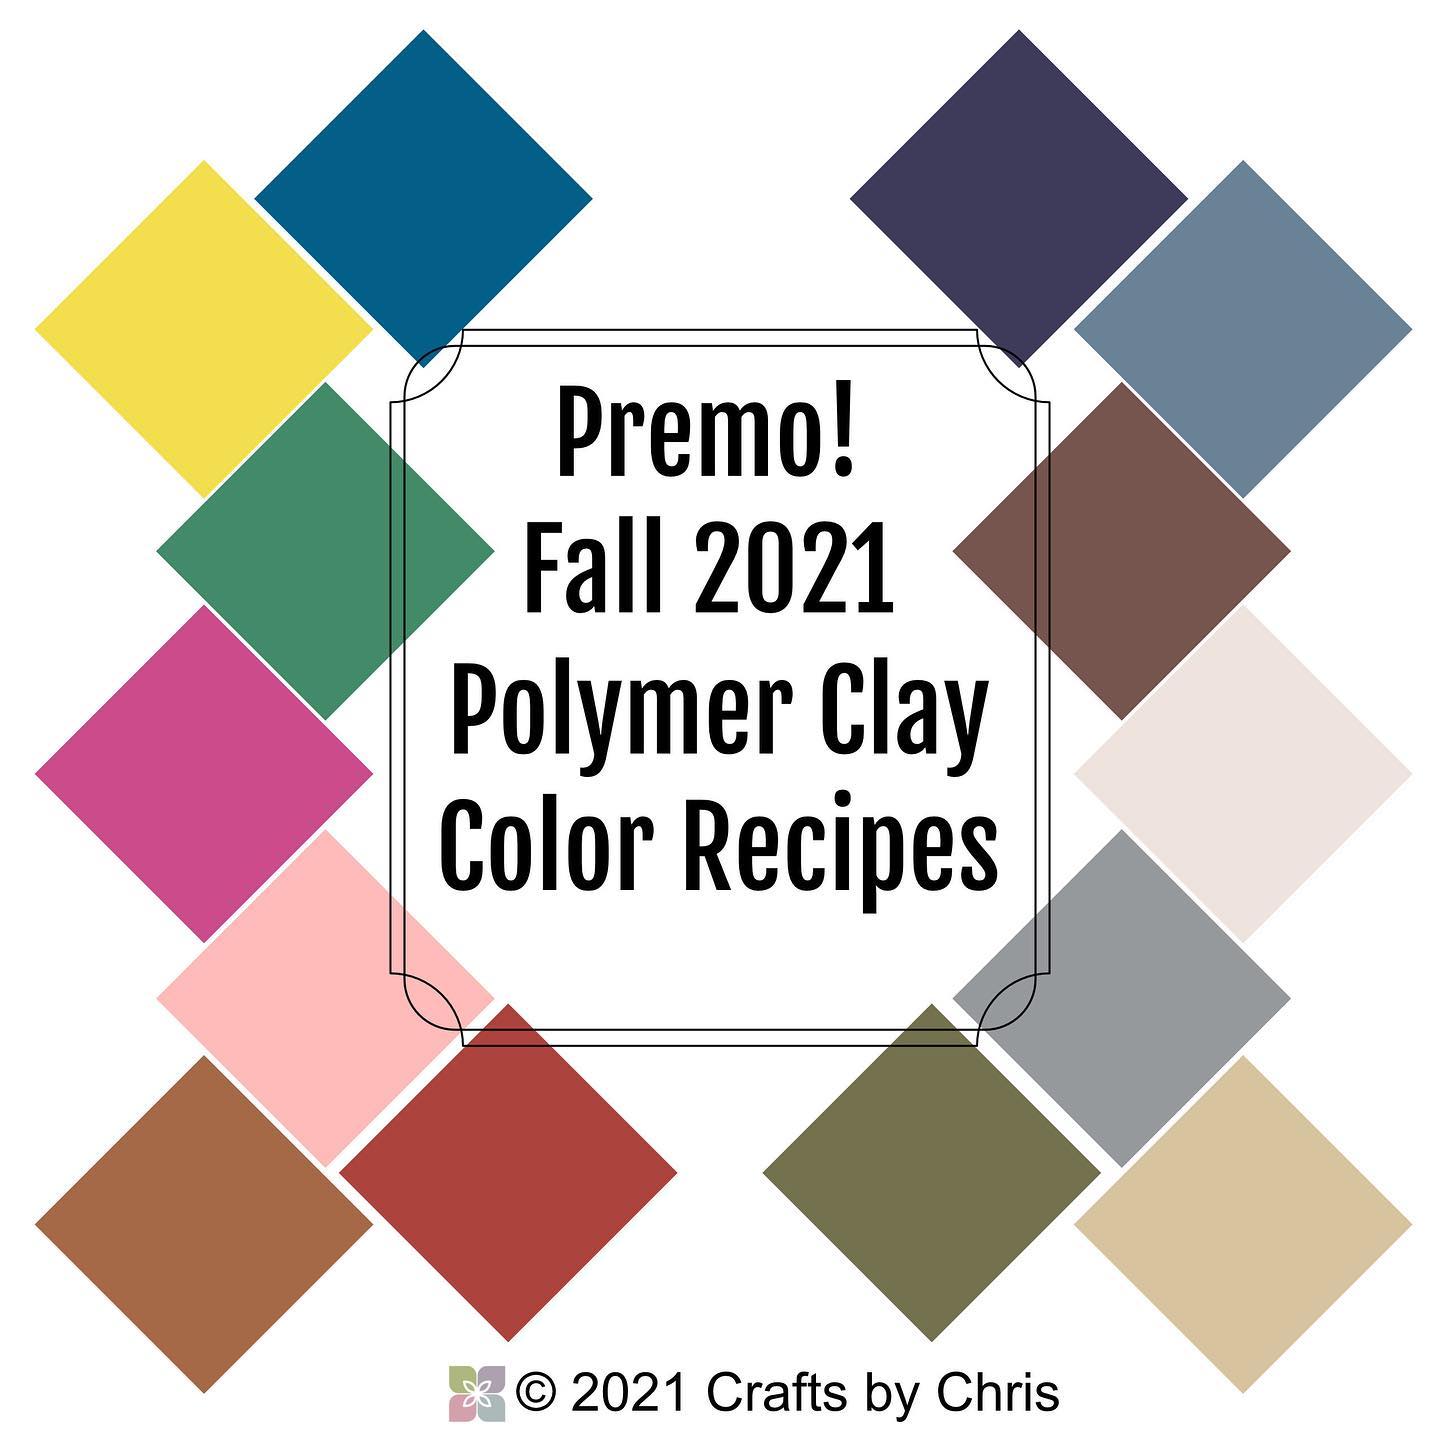 Excited to share the latest addition to my #etsy shop: 14 Premo Polymer Clay Color Recipes for Fall 2021 l polymer clay 